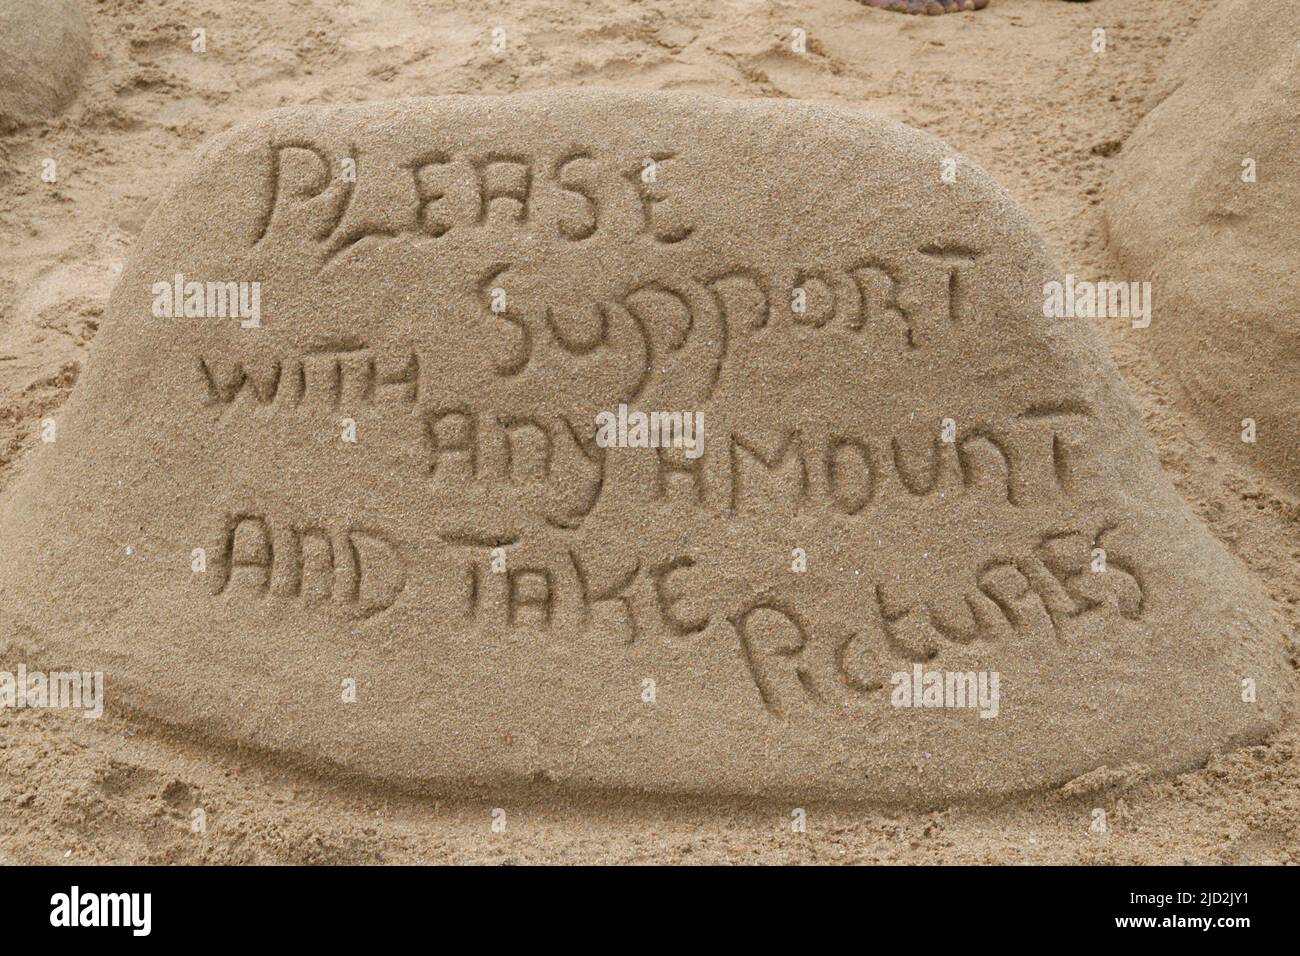 Sand sculpture 'Please support with any amount and take pictures', Umfolozi Beach, KwaZulu Natal, South Africa. Stock Photo